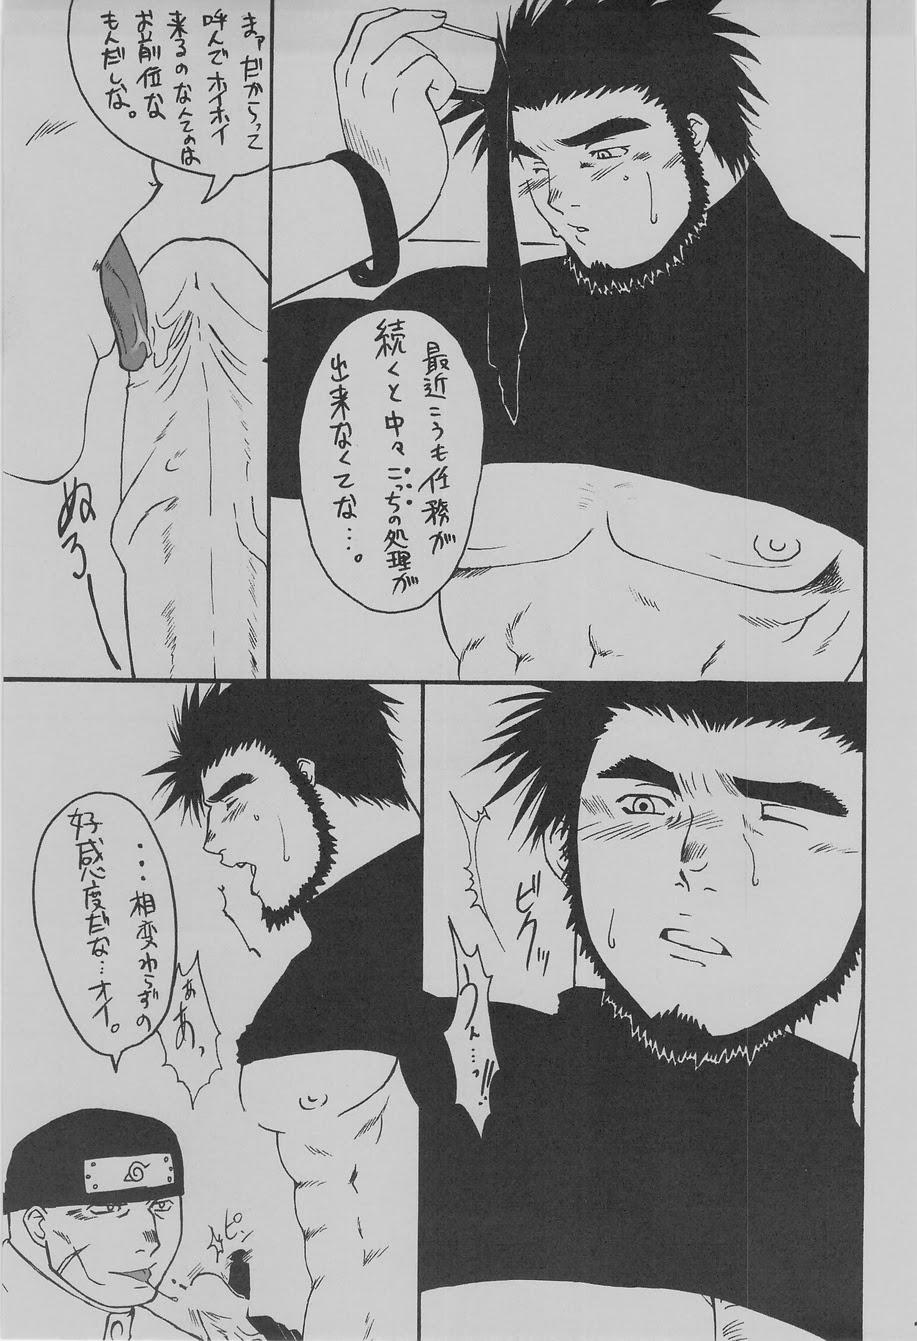 Two Ka - it happened in the distant past - Naruto Fullmetal alchemist Gunparade march Cocksucker - Page 13